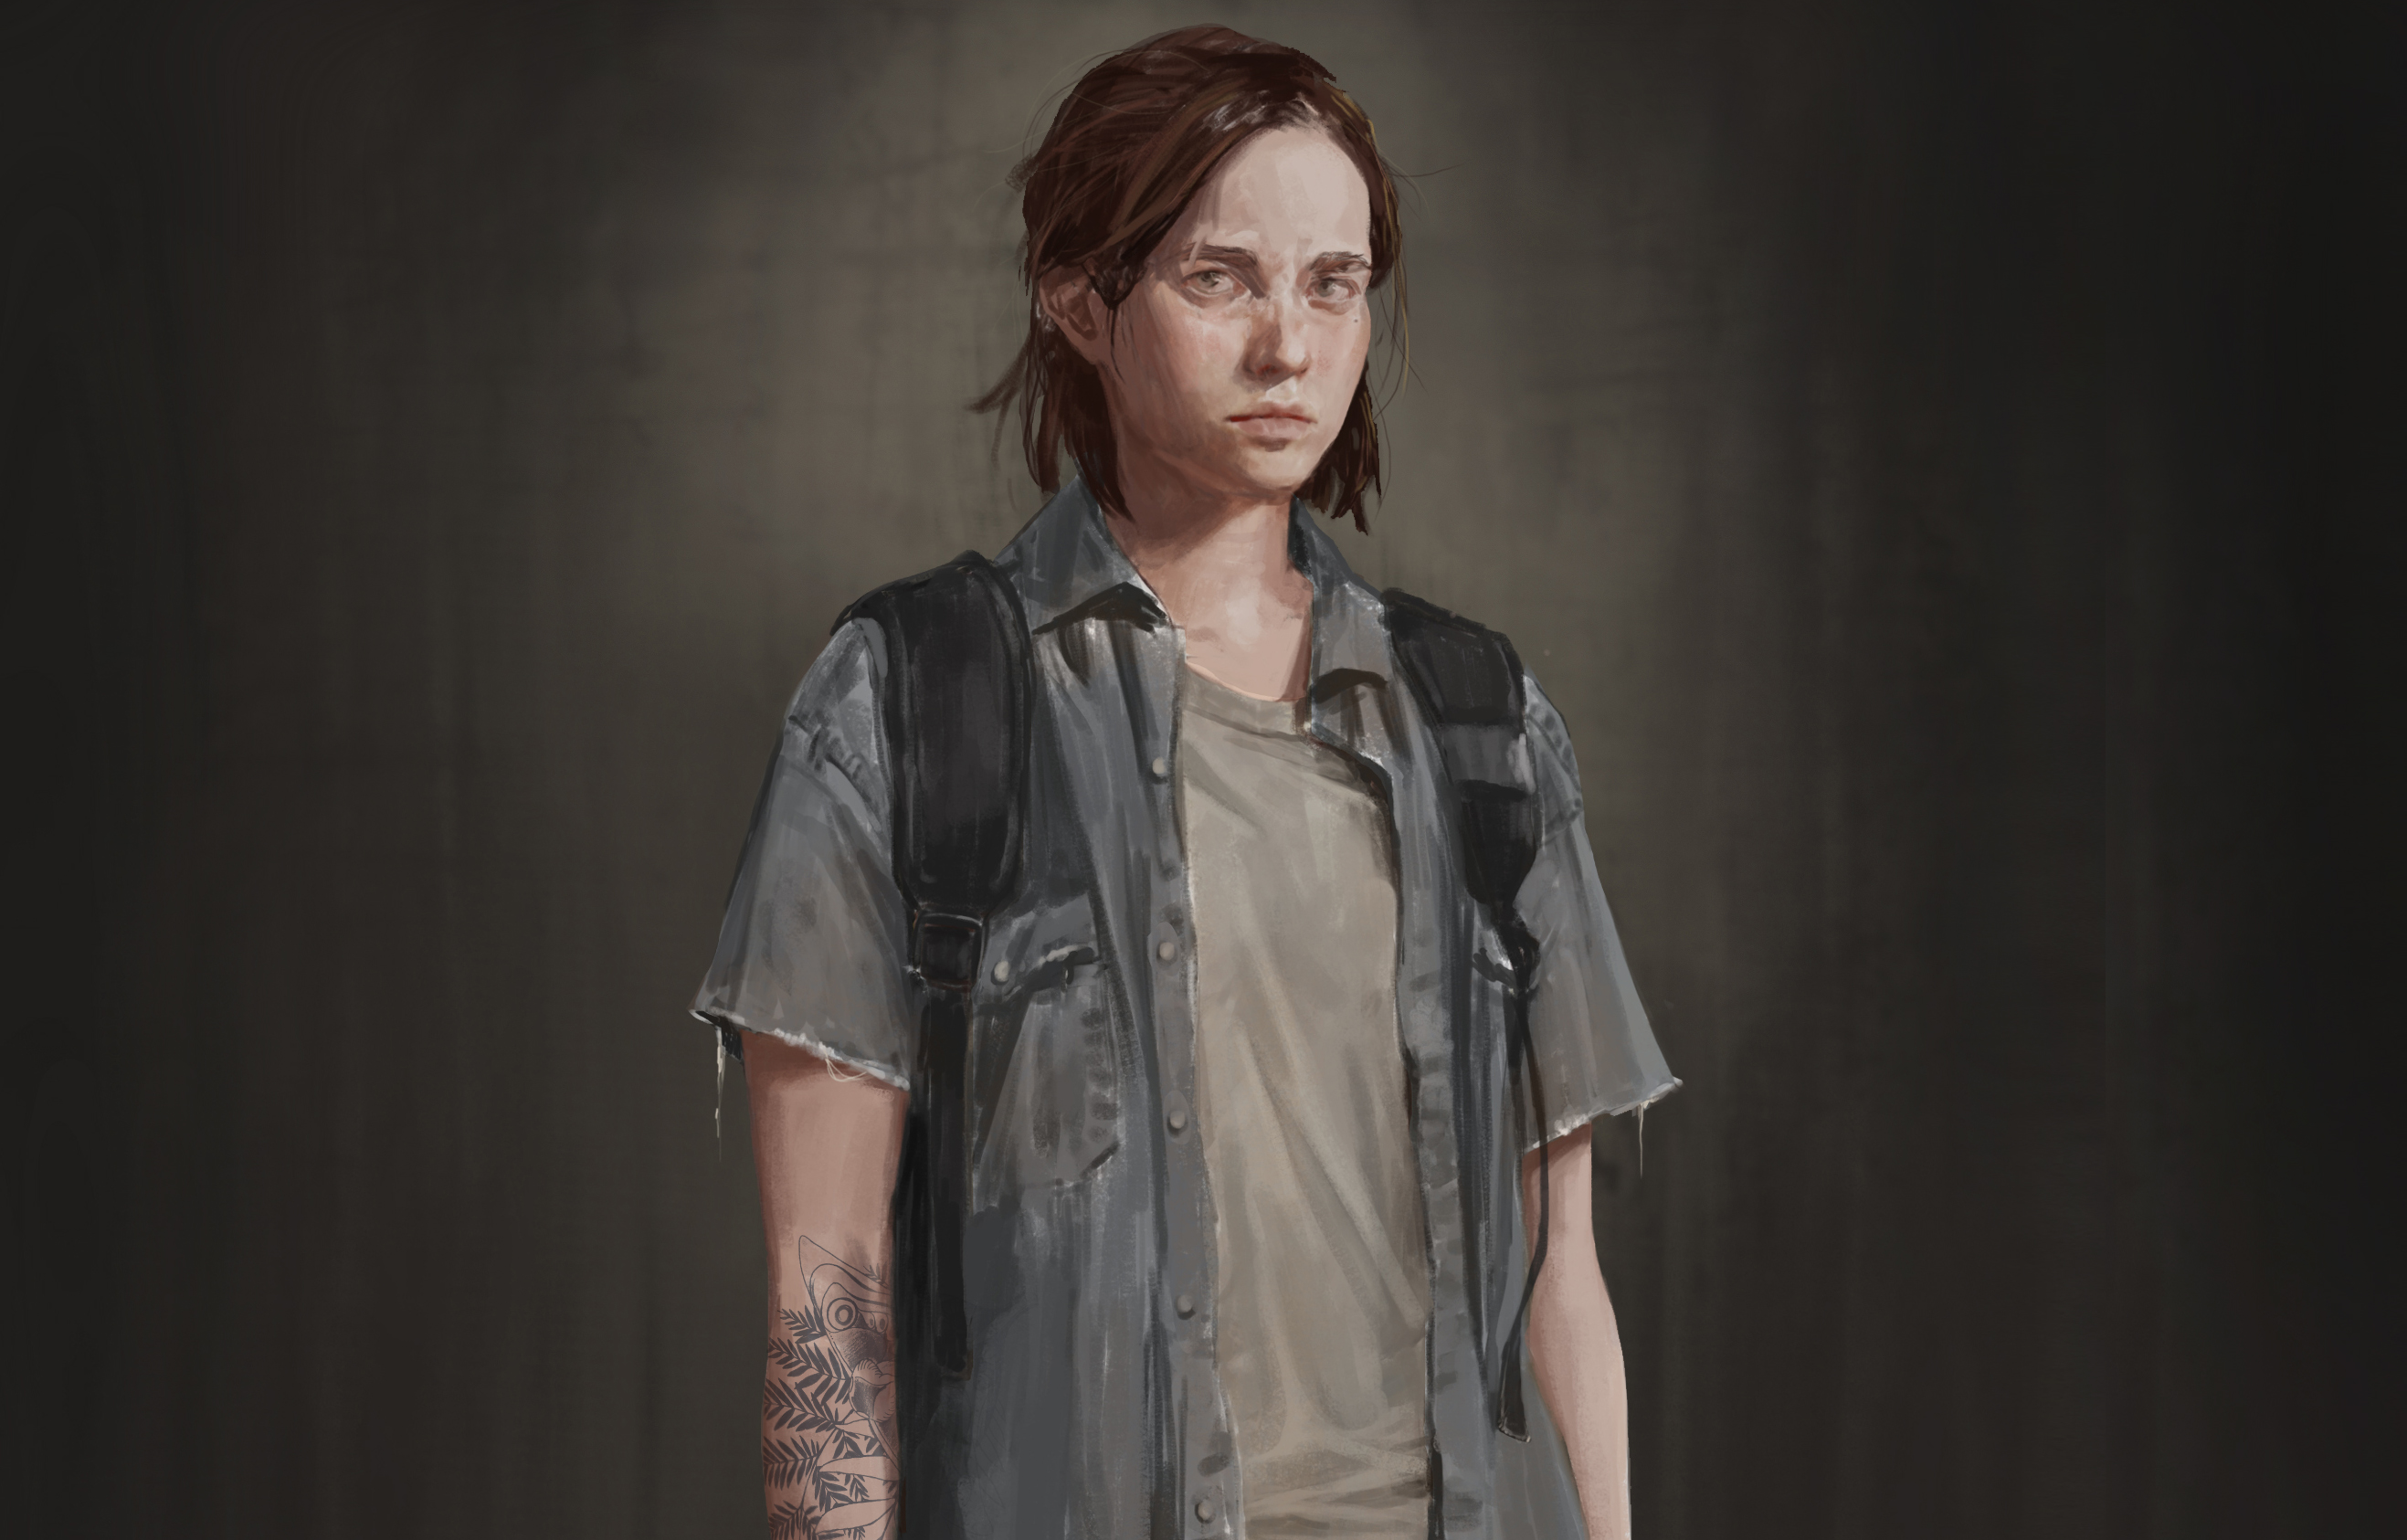 Saraphites Wall The Last of Us 2 Wallpapers